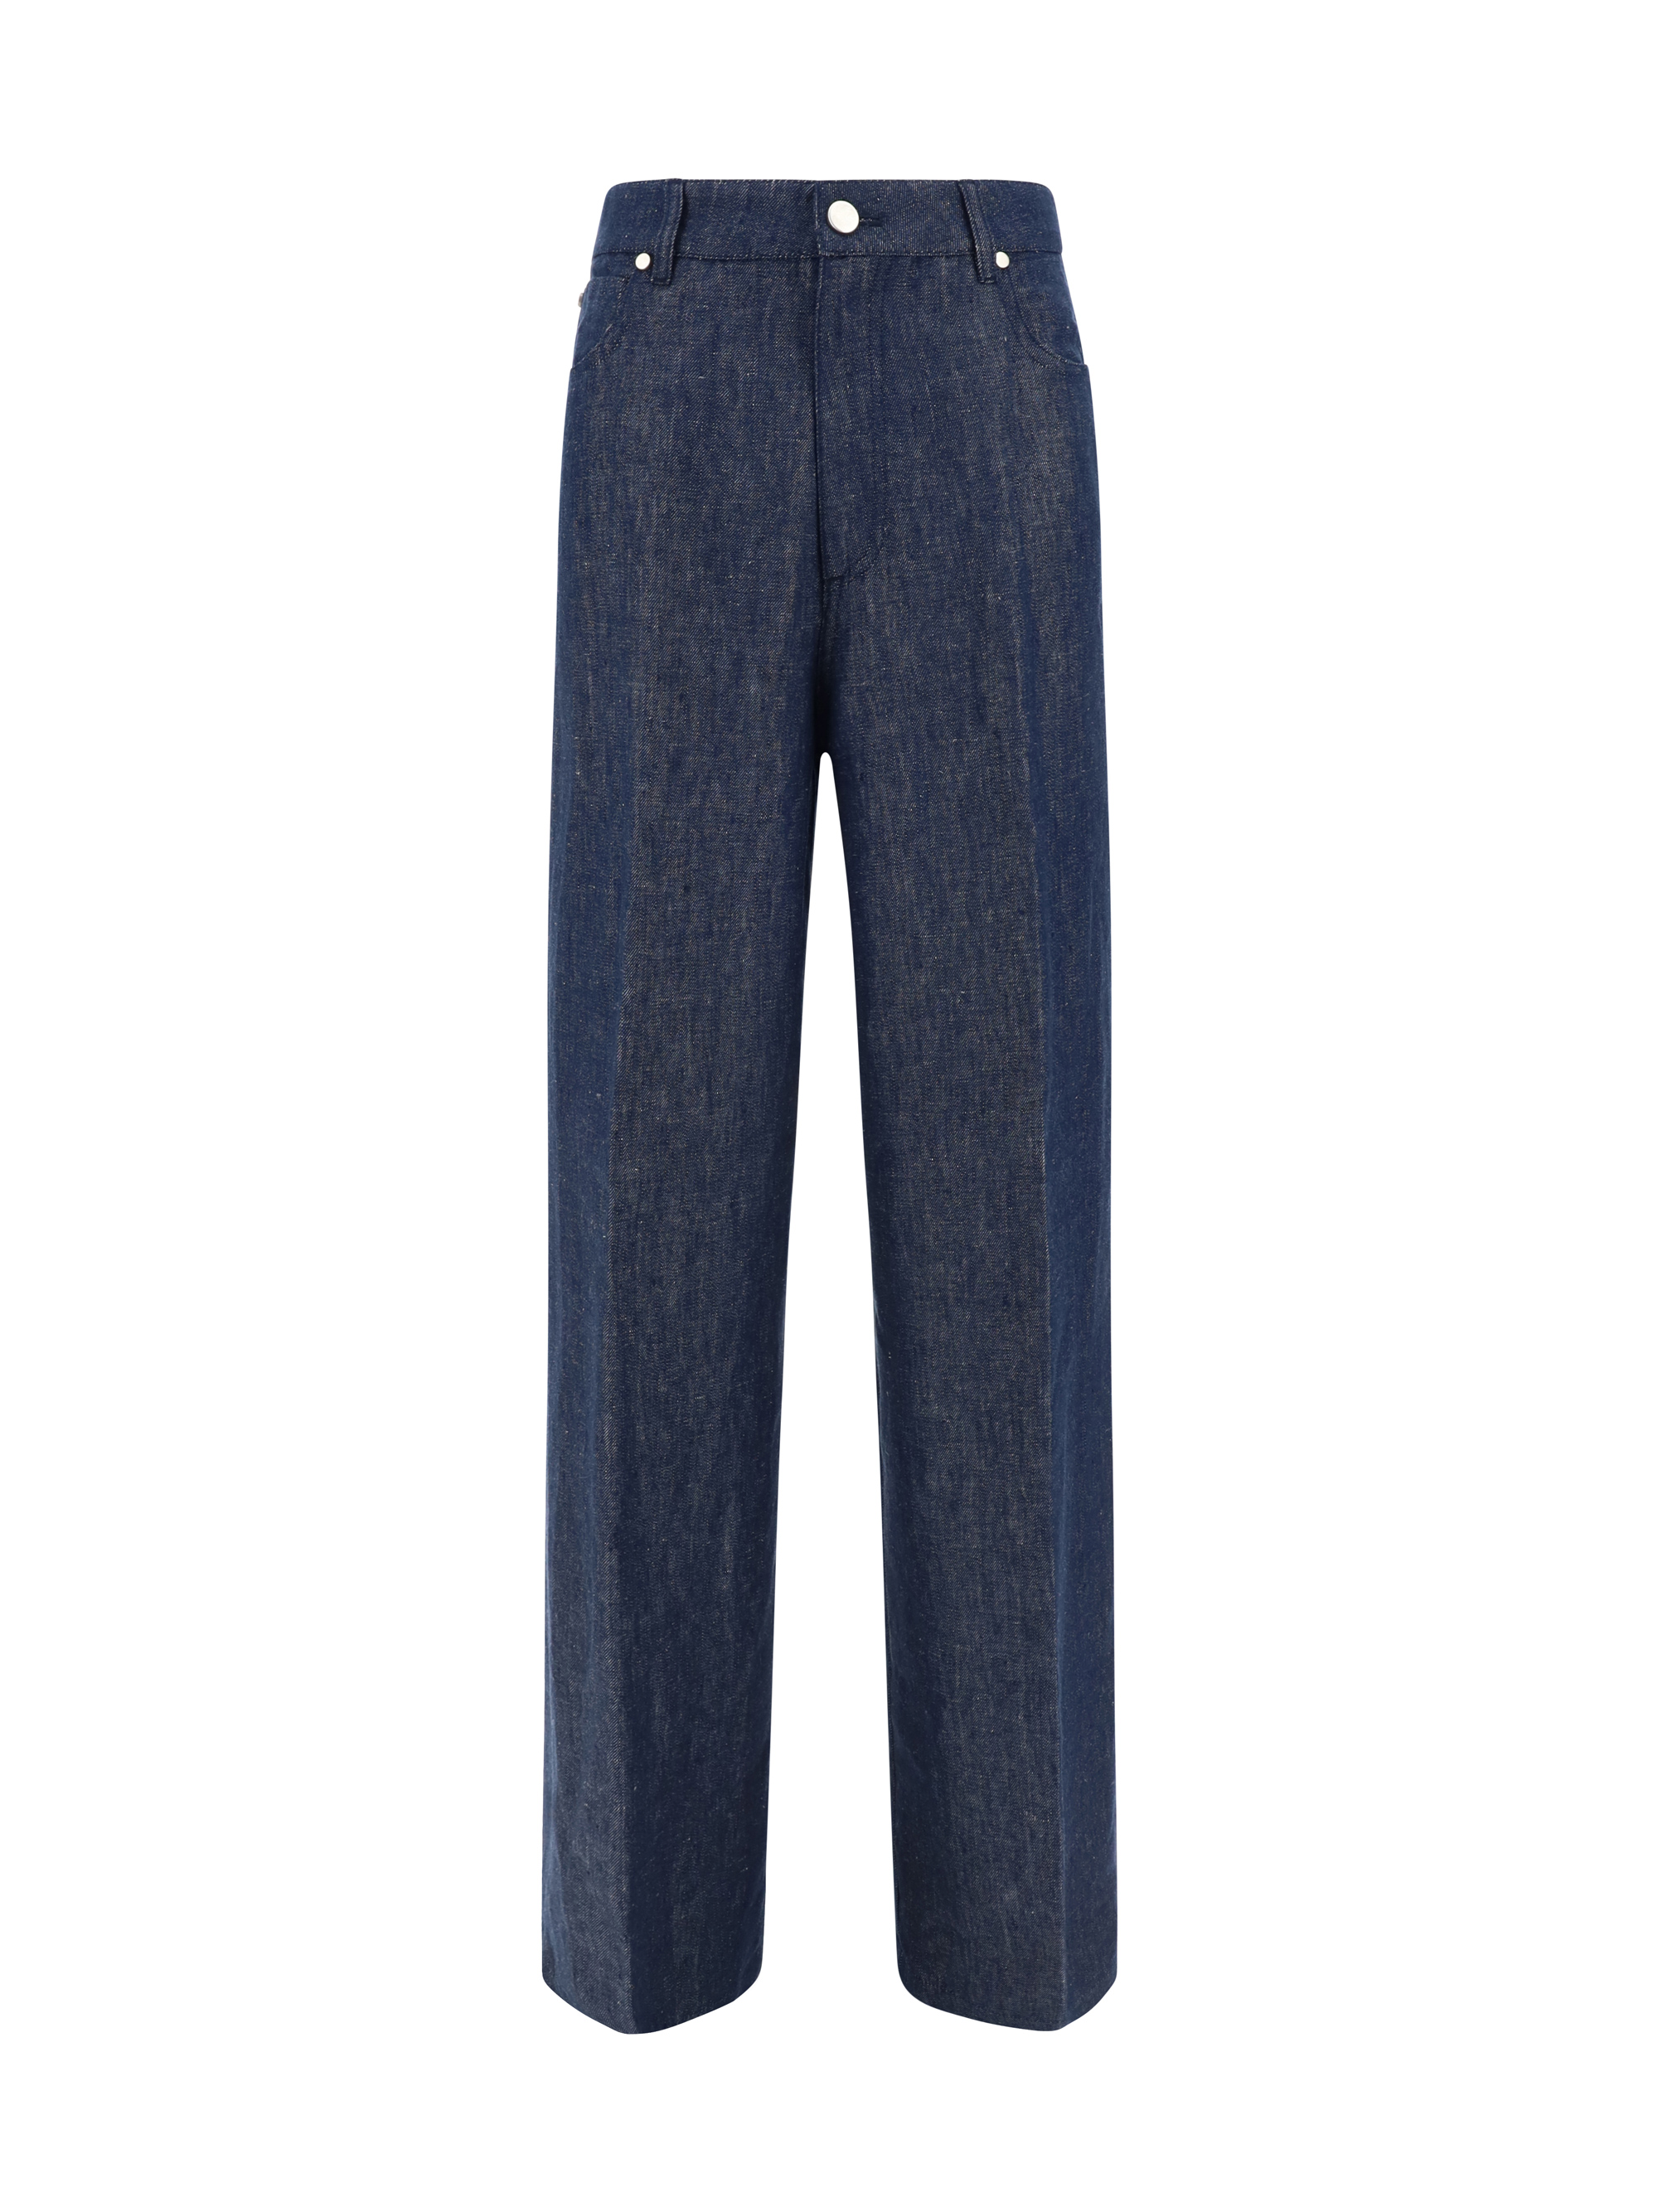 Cruna Taylor Trousers In Notte